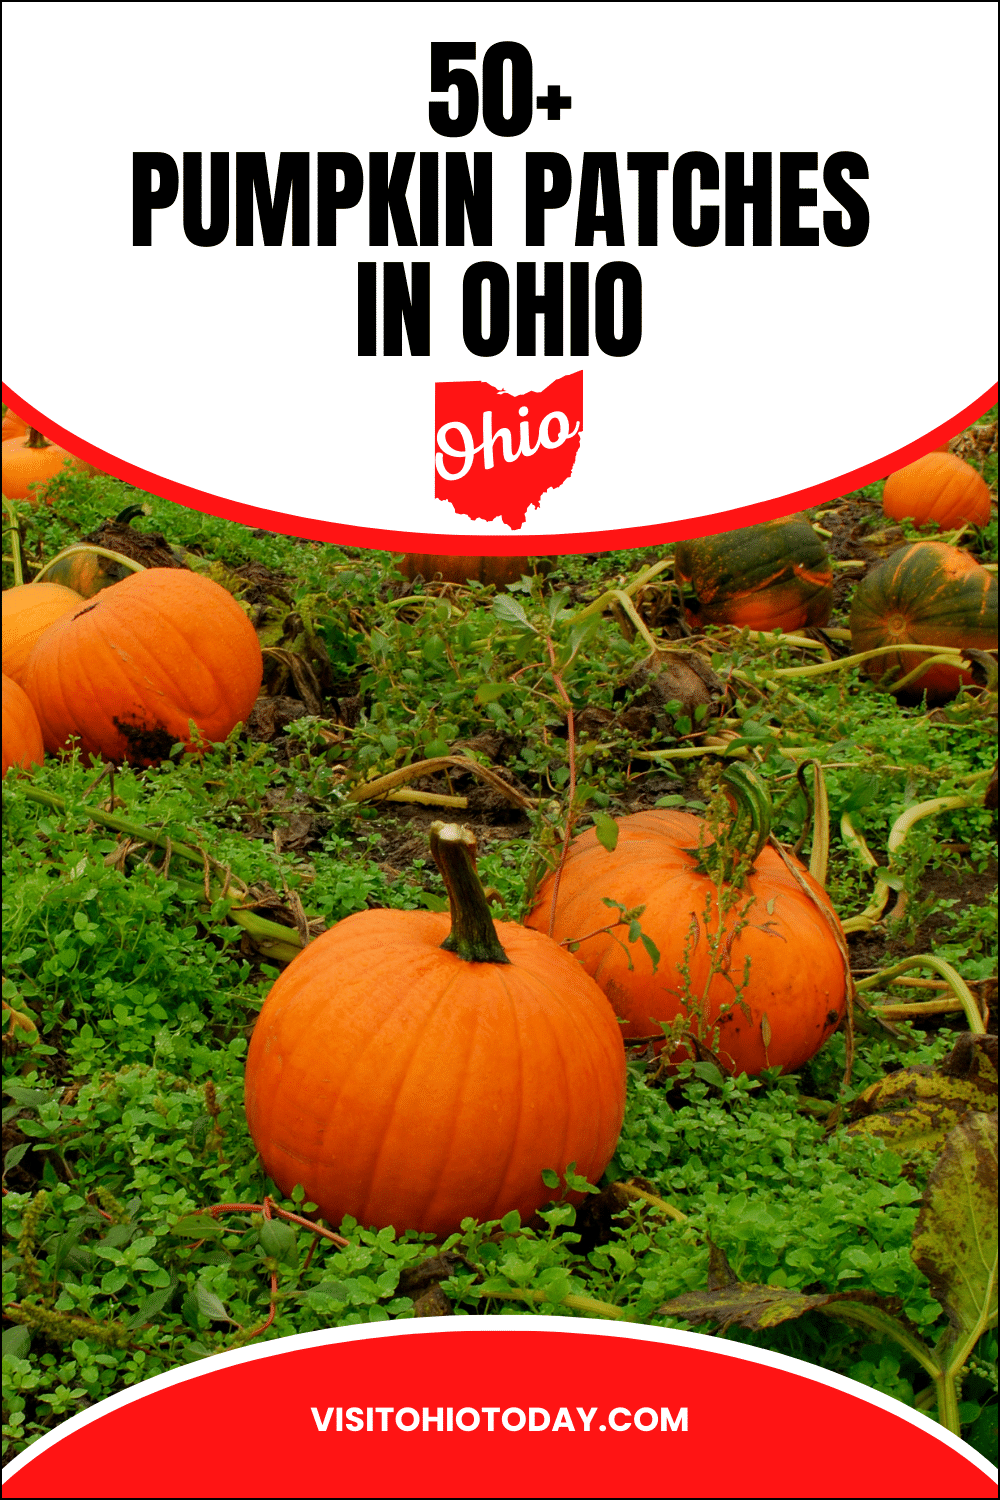 Looking for the perfect pumpkin patch near you to visit this weekend in Ohio? We've got you covered with the best pumpkin patches in Ohio! | Pumpkin Patches In Ohio | Ohio Adventures | Ohio Pumpkins | Ohio Pumpkin Patches